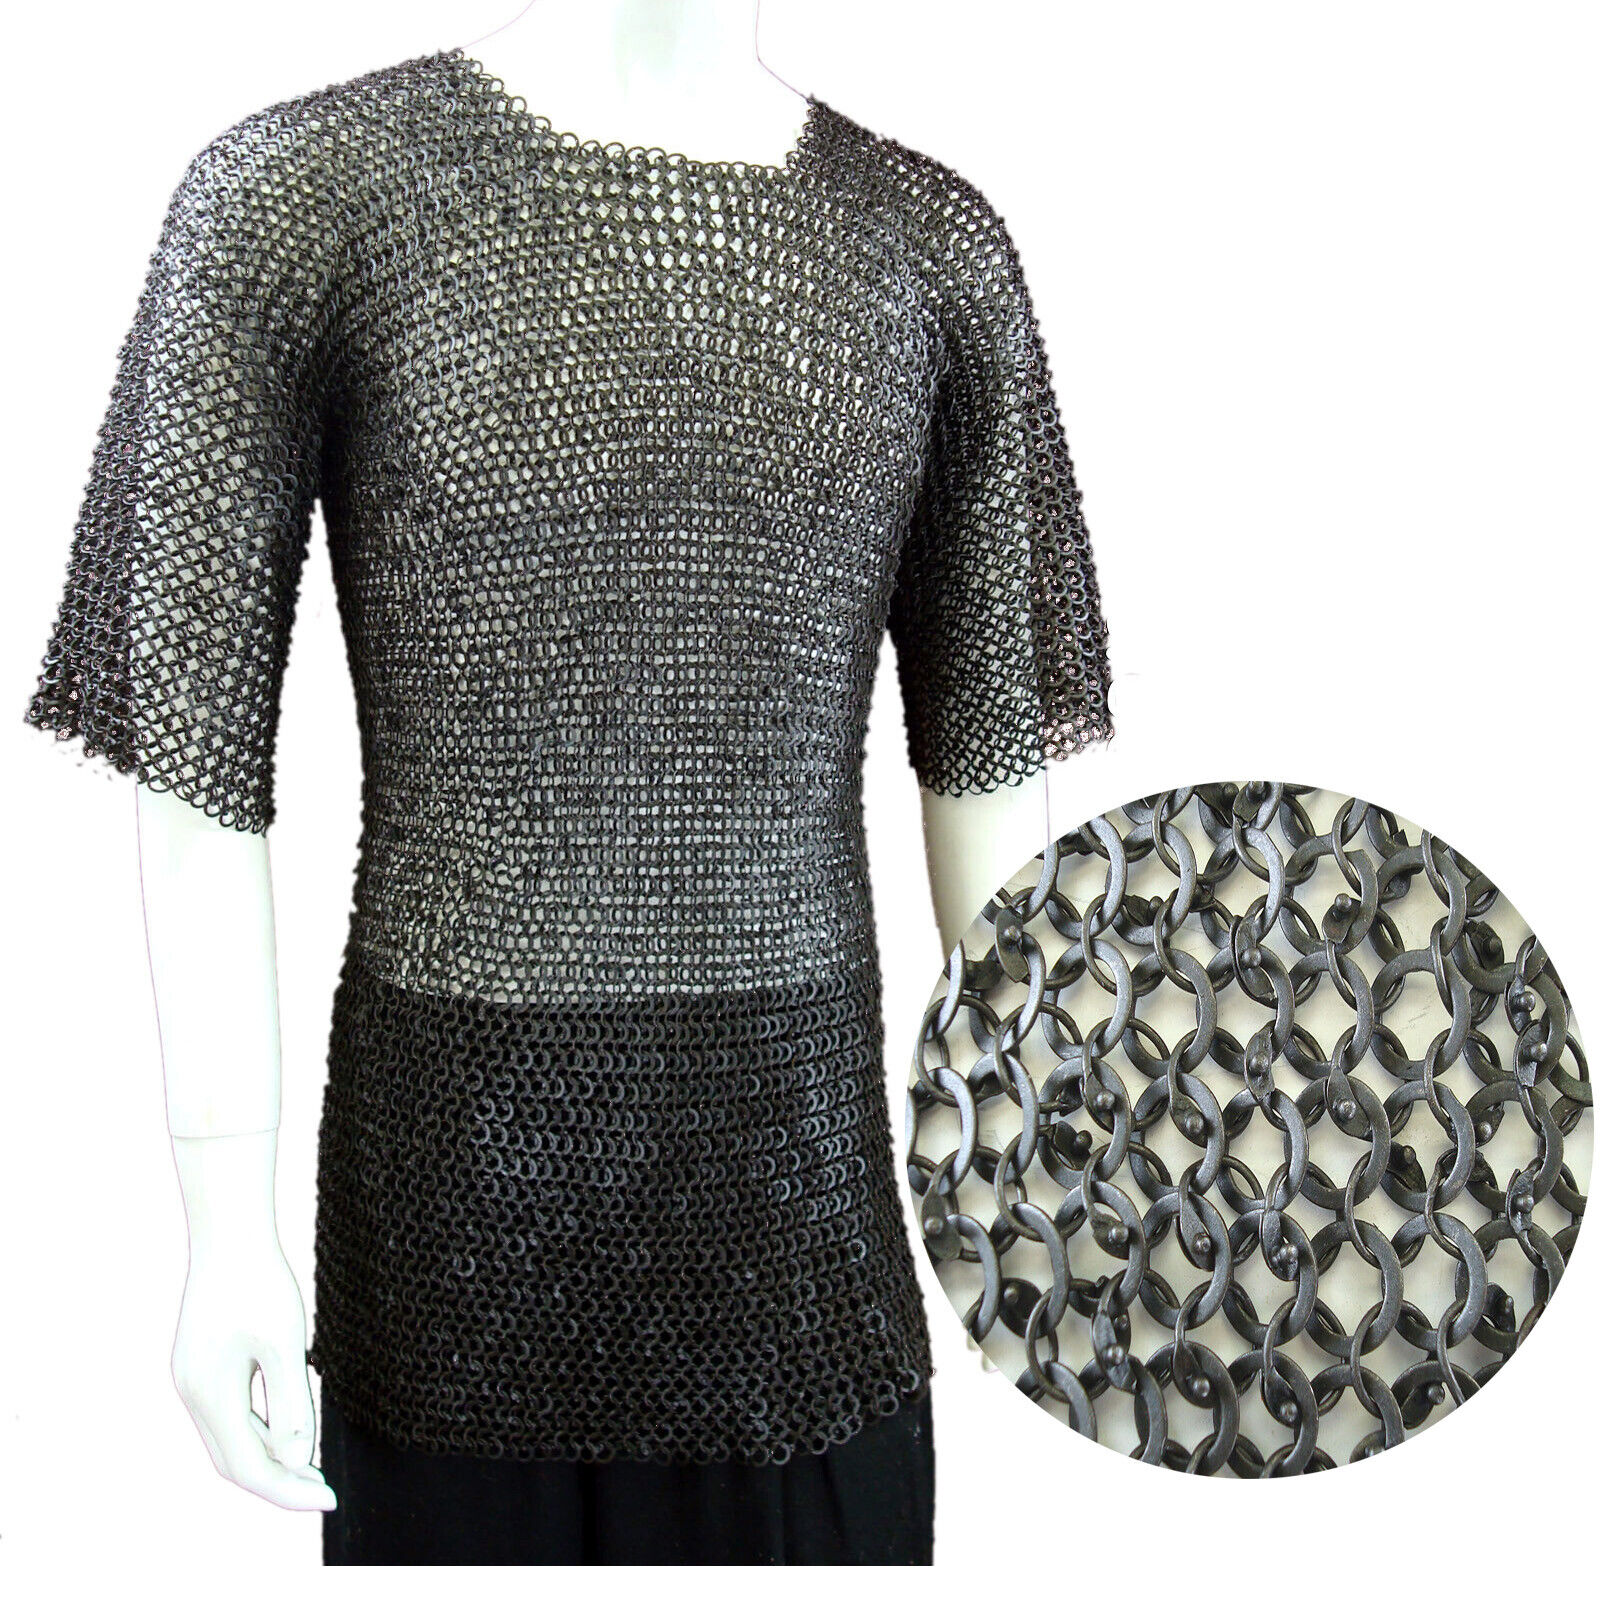 Chain Mail Shirt Round Riveted Ring With Flat Washer Armor Chainmail Haubergeon 